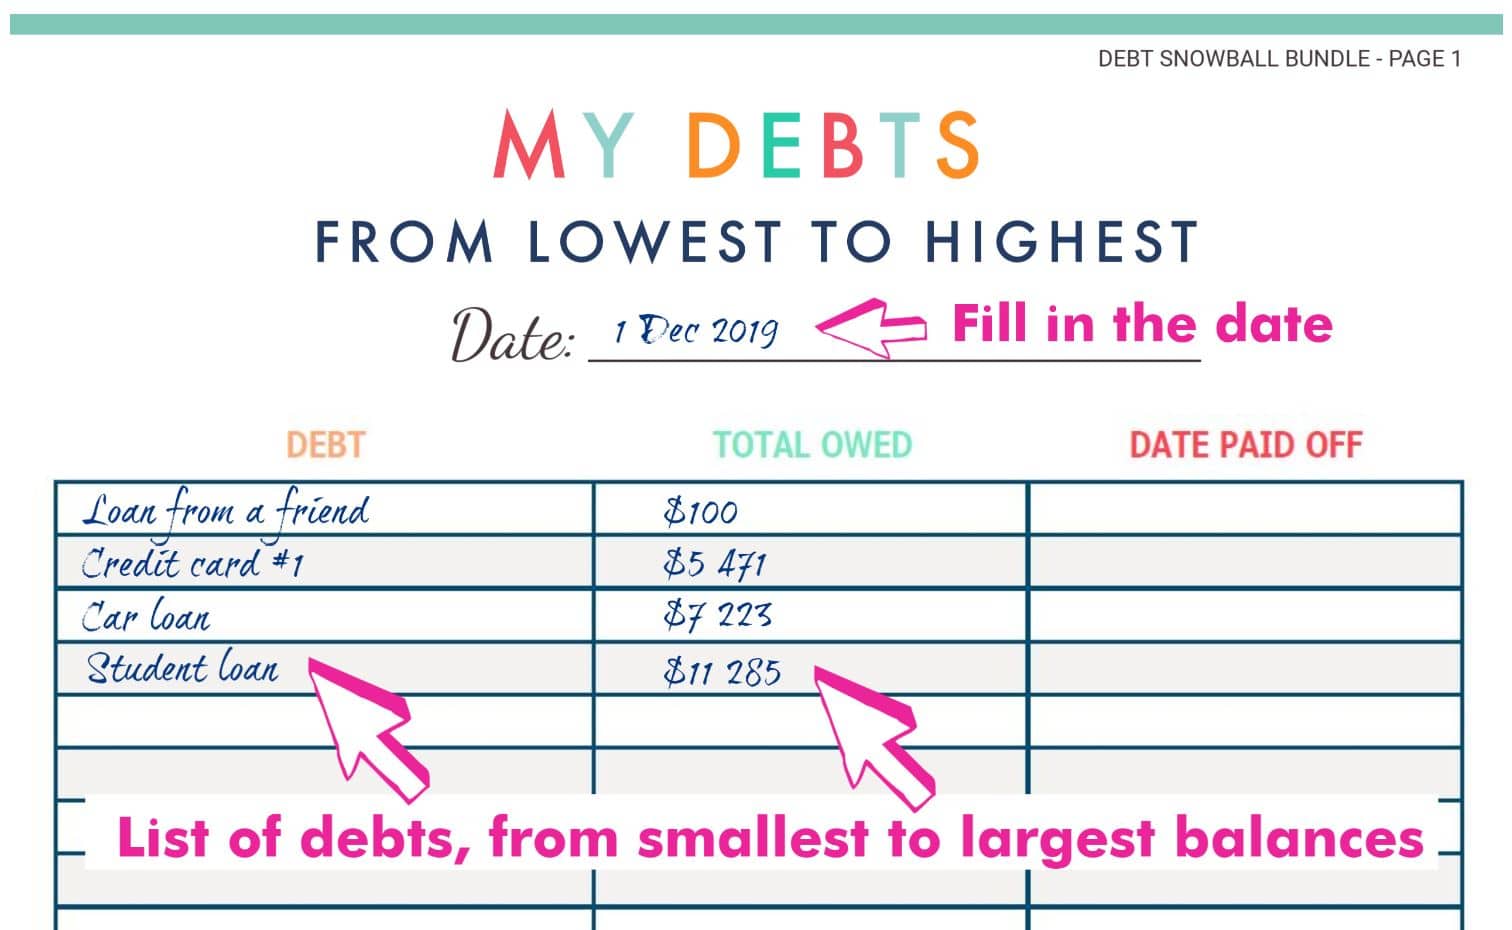 How To Get Out Of Debt With The Debt Snowball Method